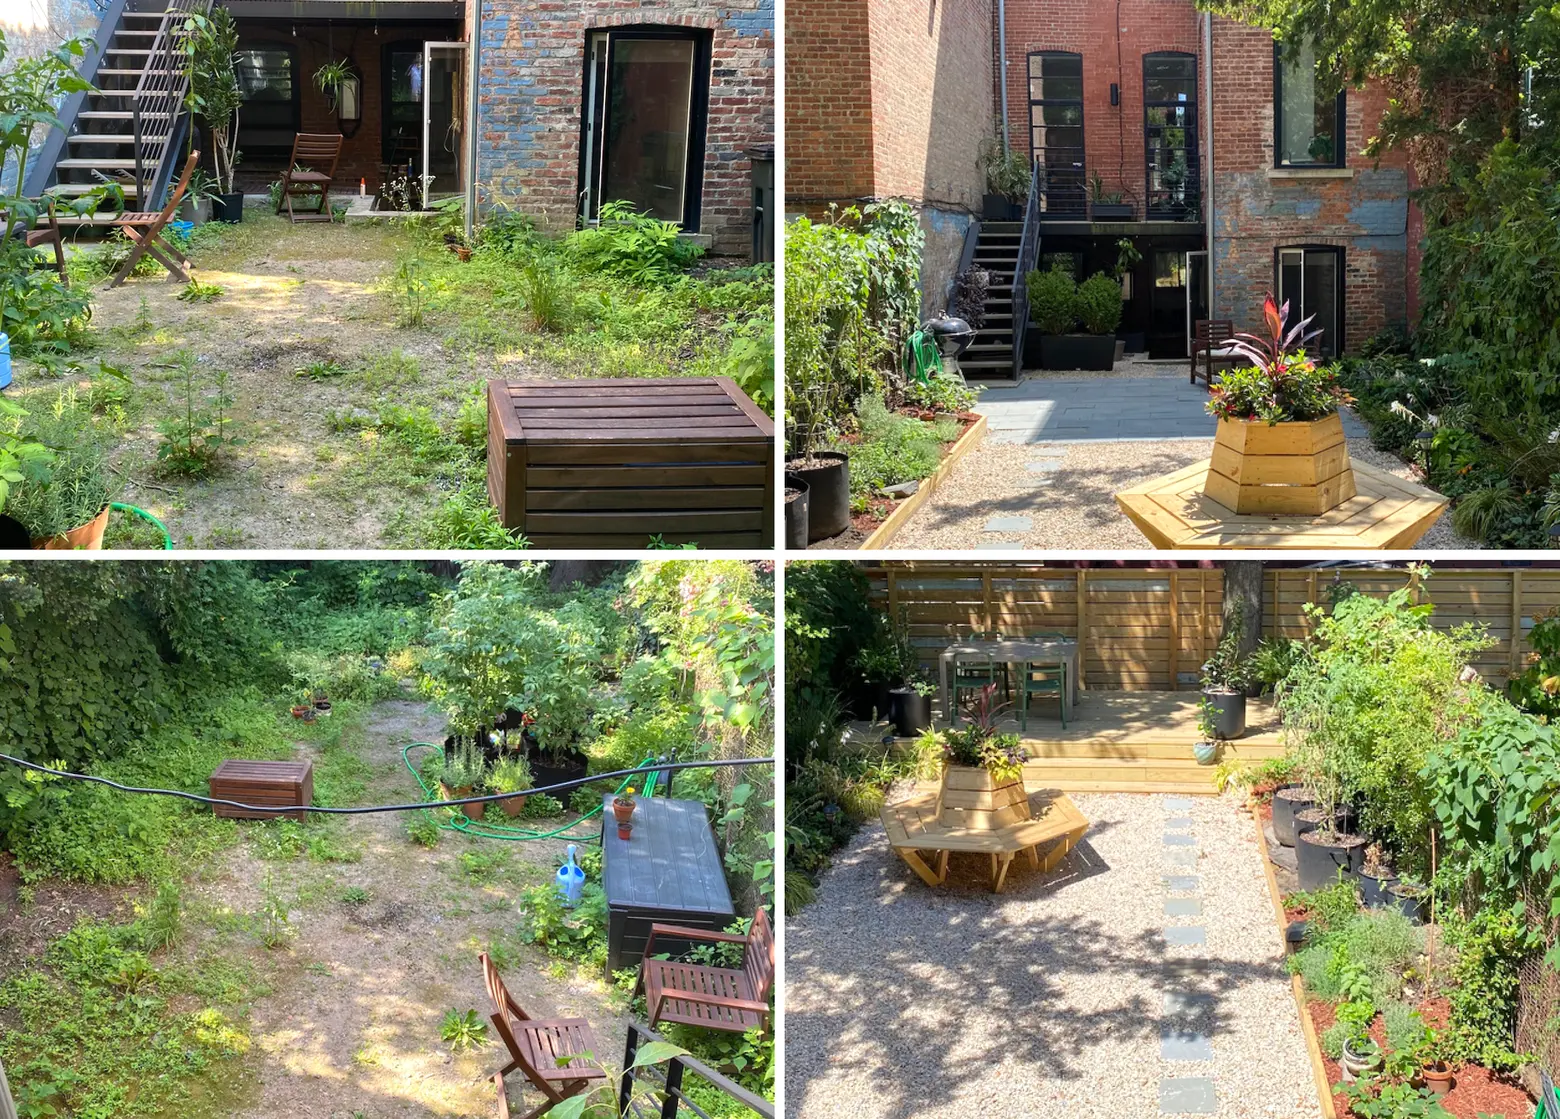 From neglected mud patch to outdoor oasis, a Brooklyn backyard gets a garden makeover